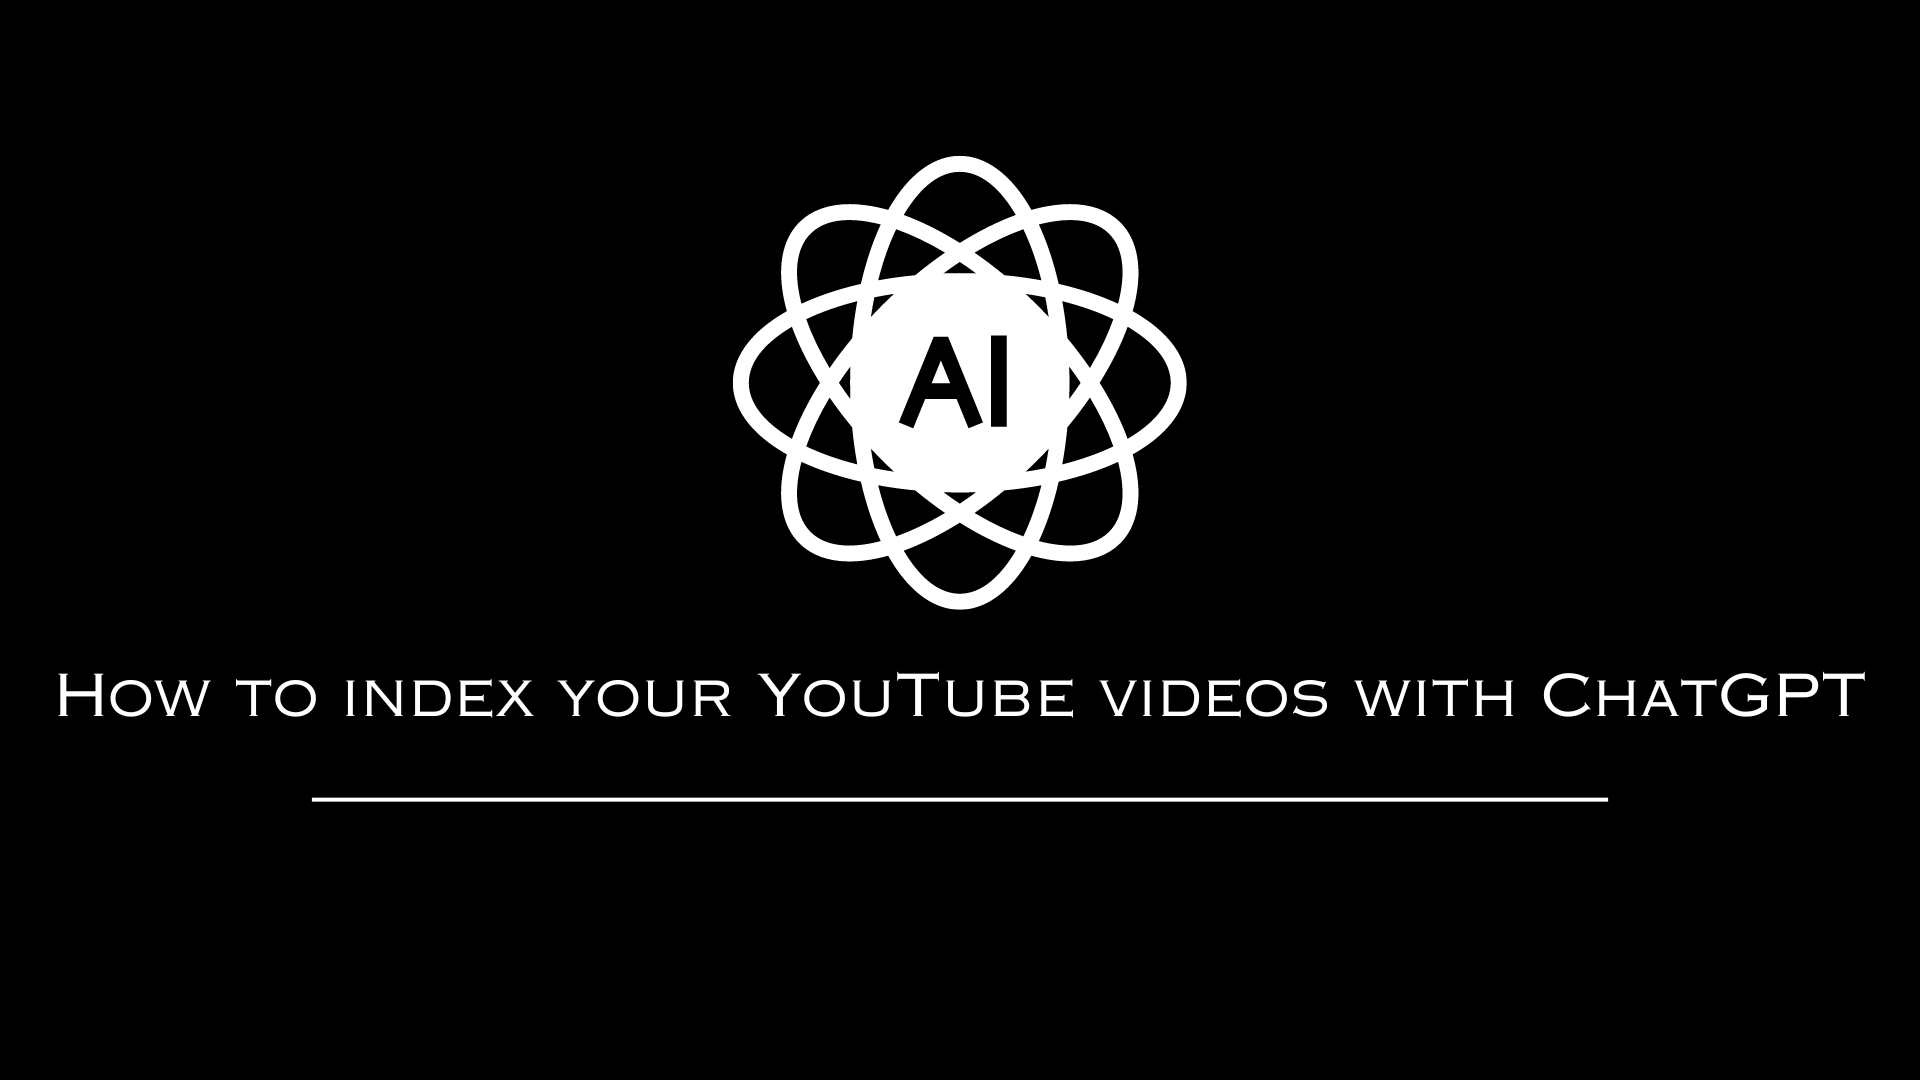 How to index your YouTube videos with ChaptGPT